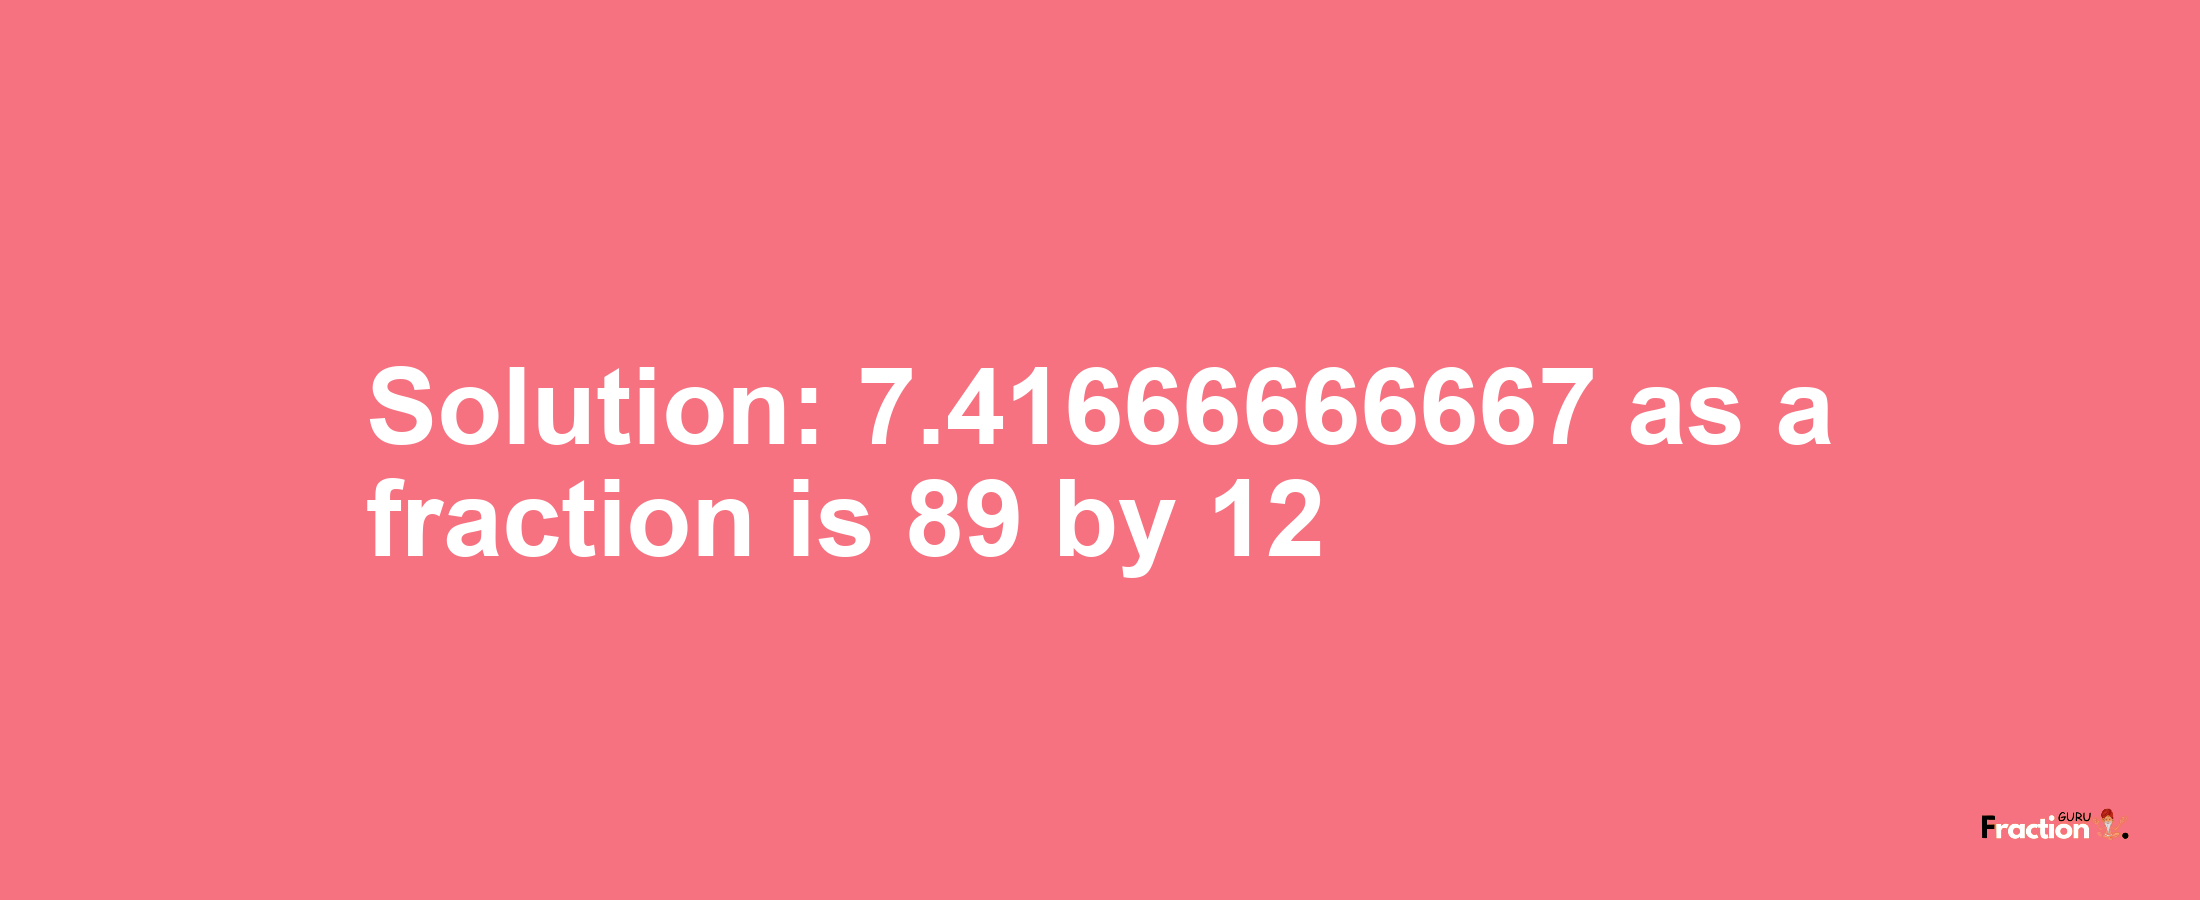 Solution:7.41666666667 as a fraction is 89/12